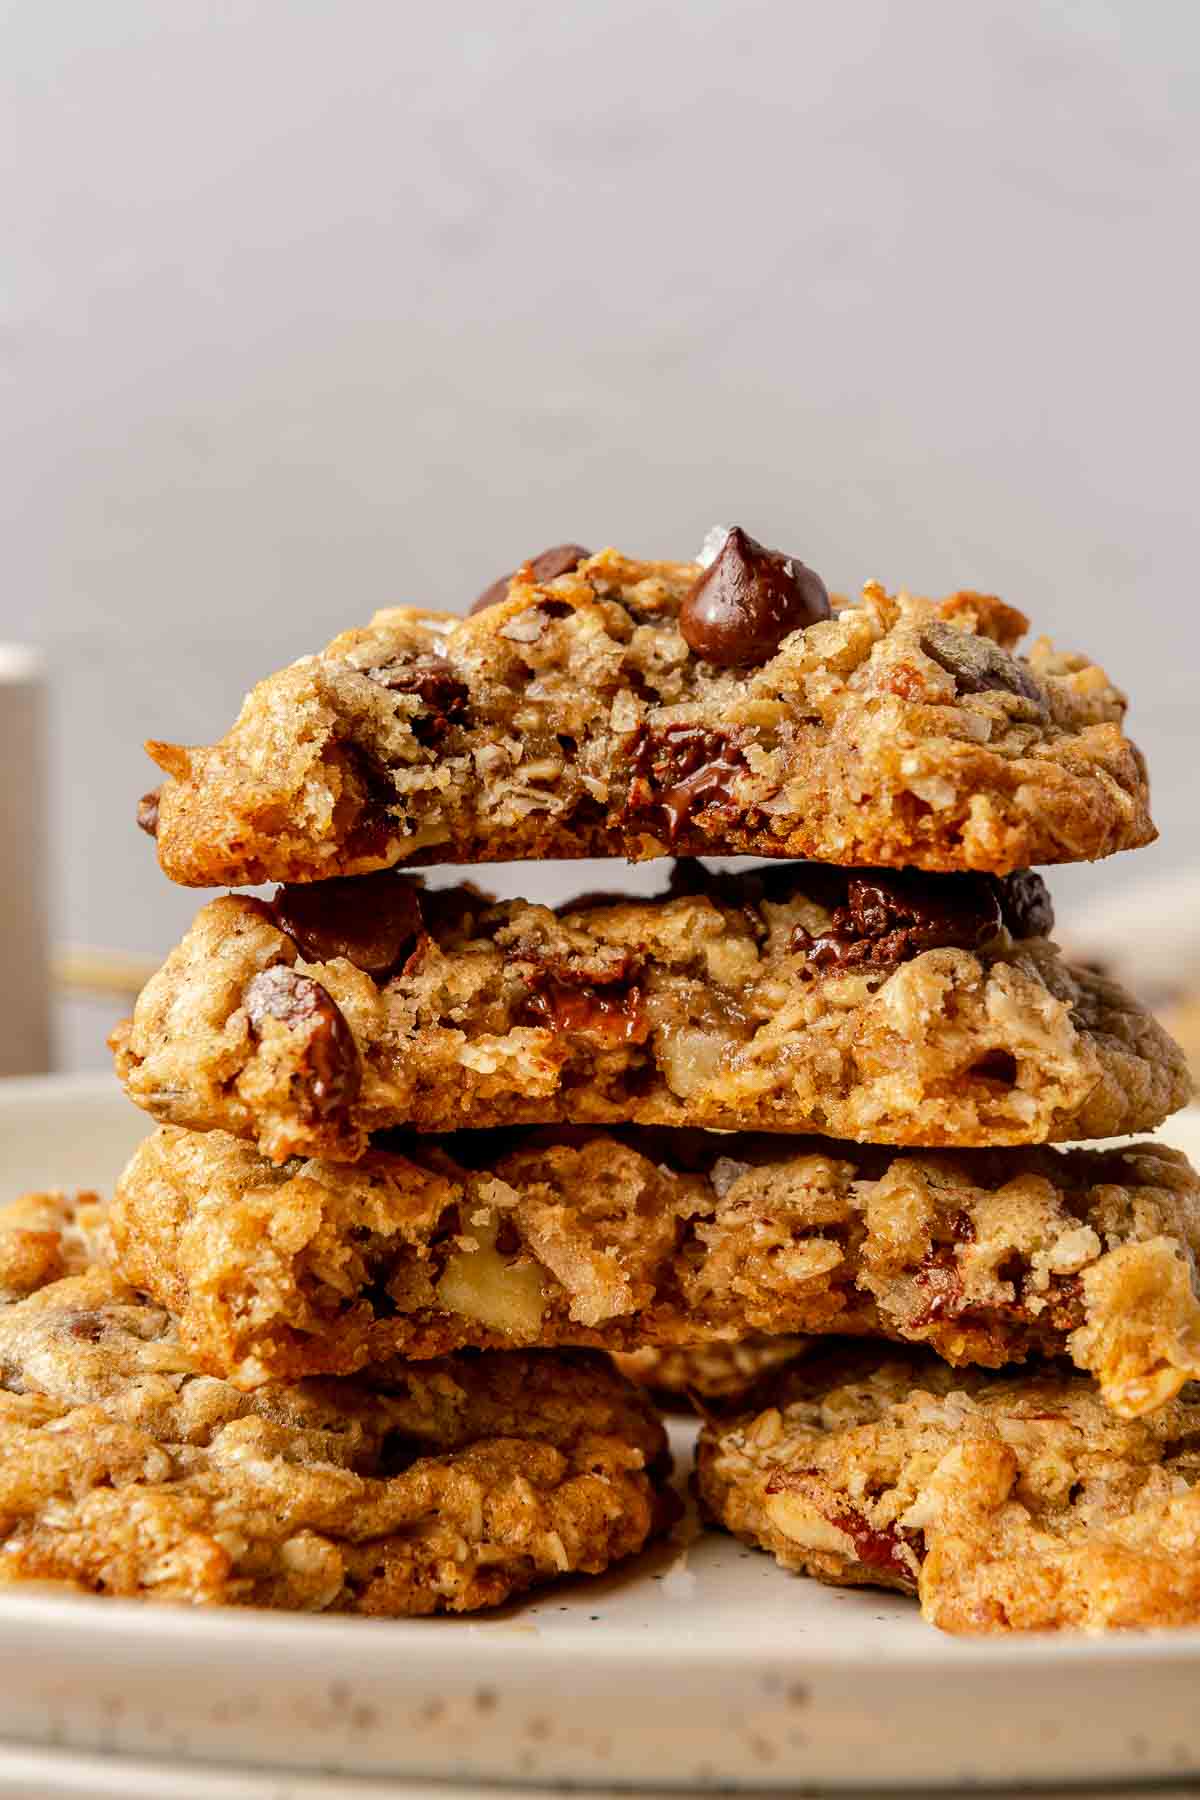 Oatmeal chocolate chip cookies stacked on a plate.